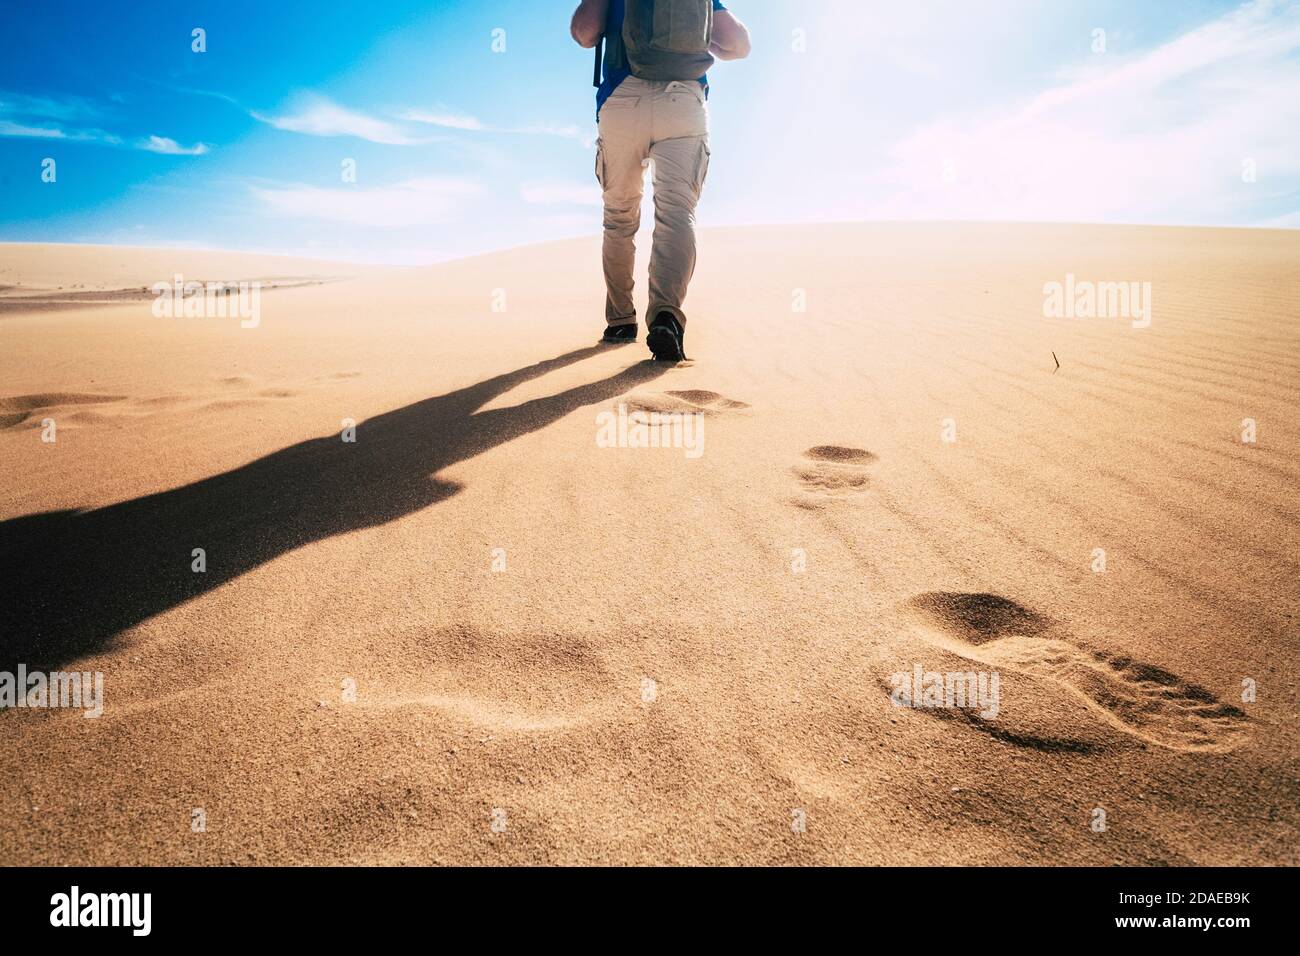 Adventure and explore in a changed planet earth for climate warming concept - man viewed from back walking on a desert dunes with blue sky in background Stock Photo